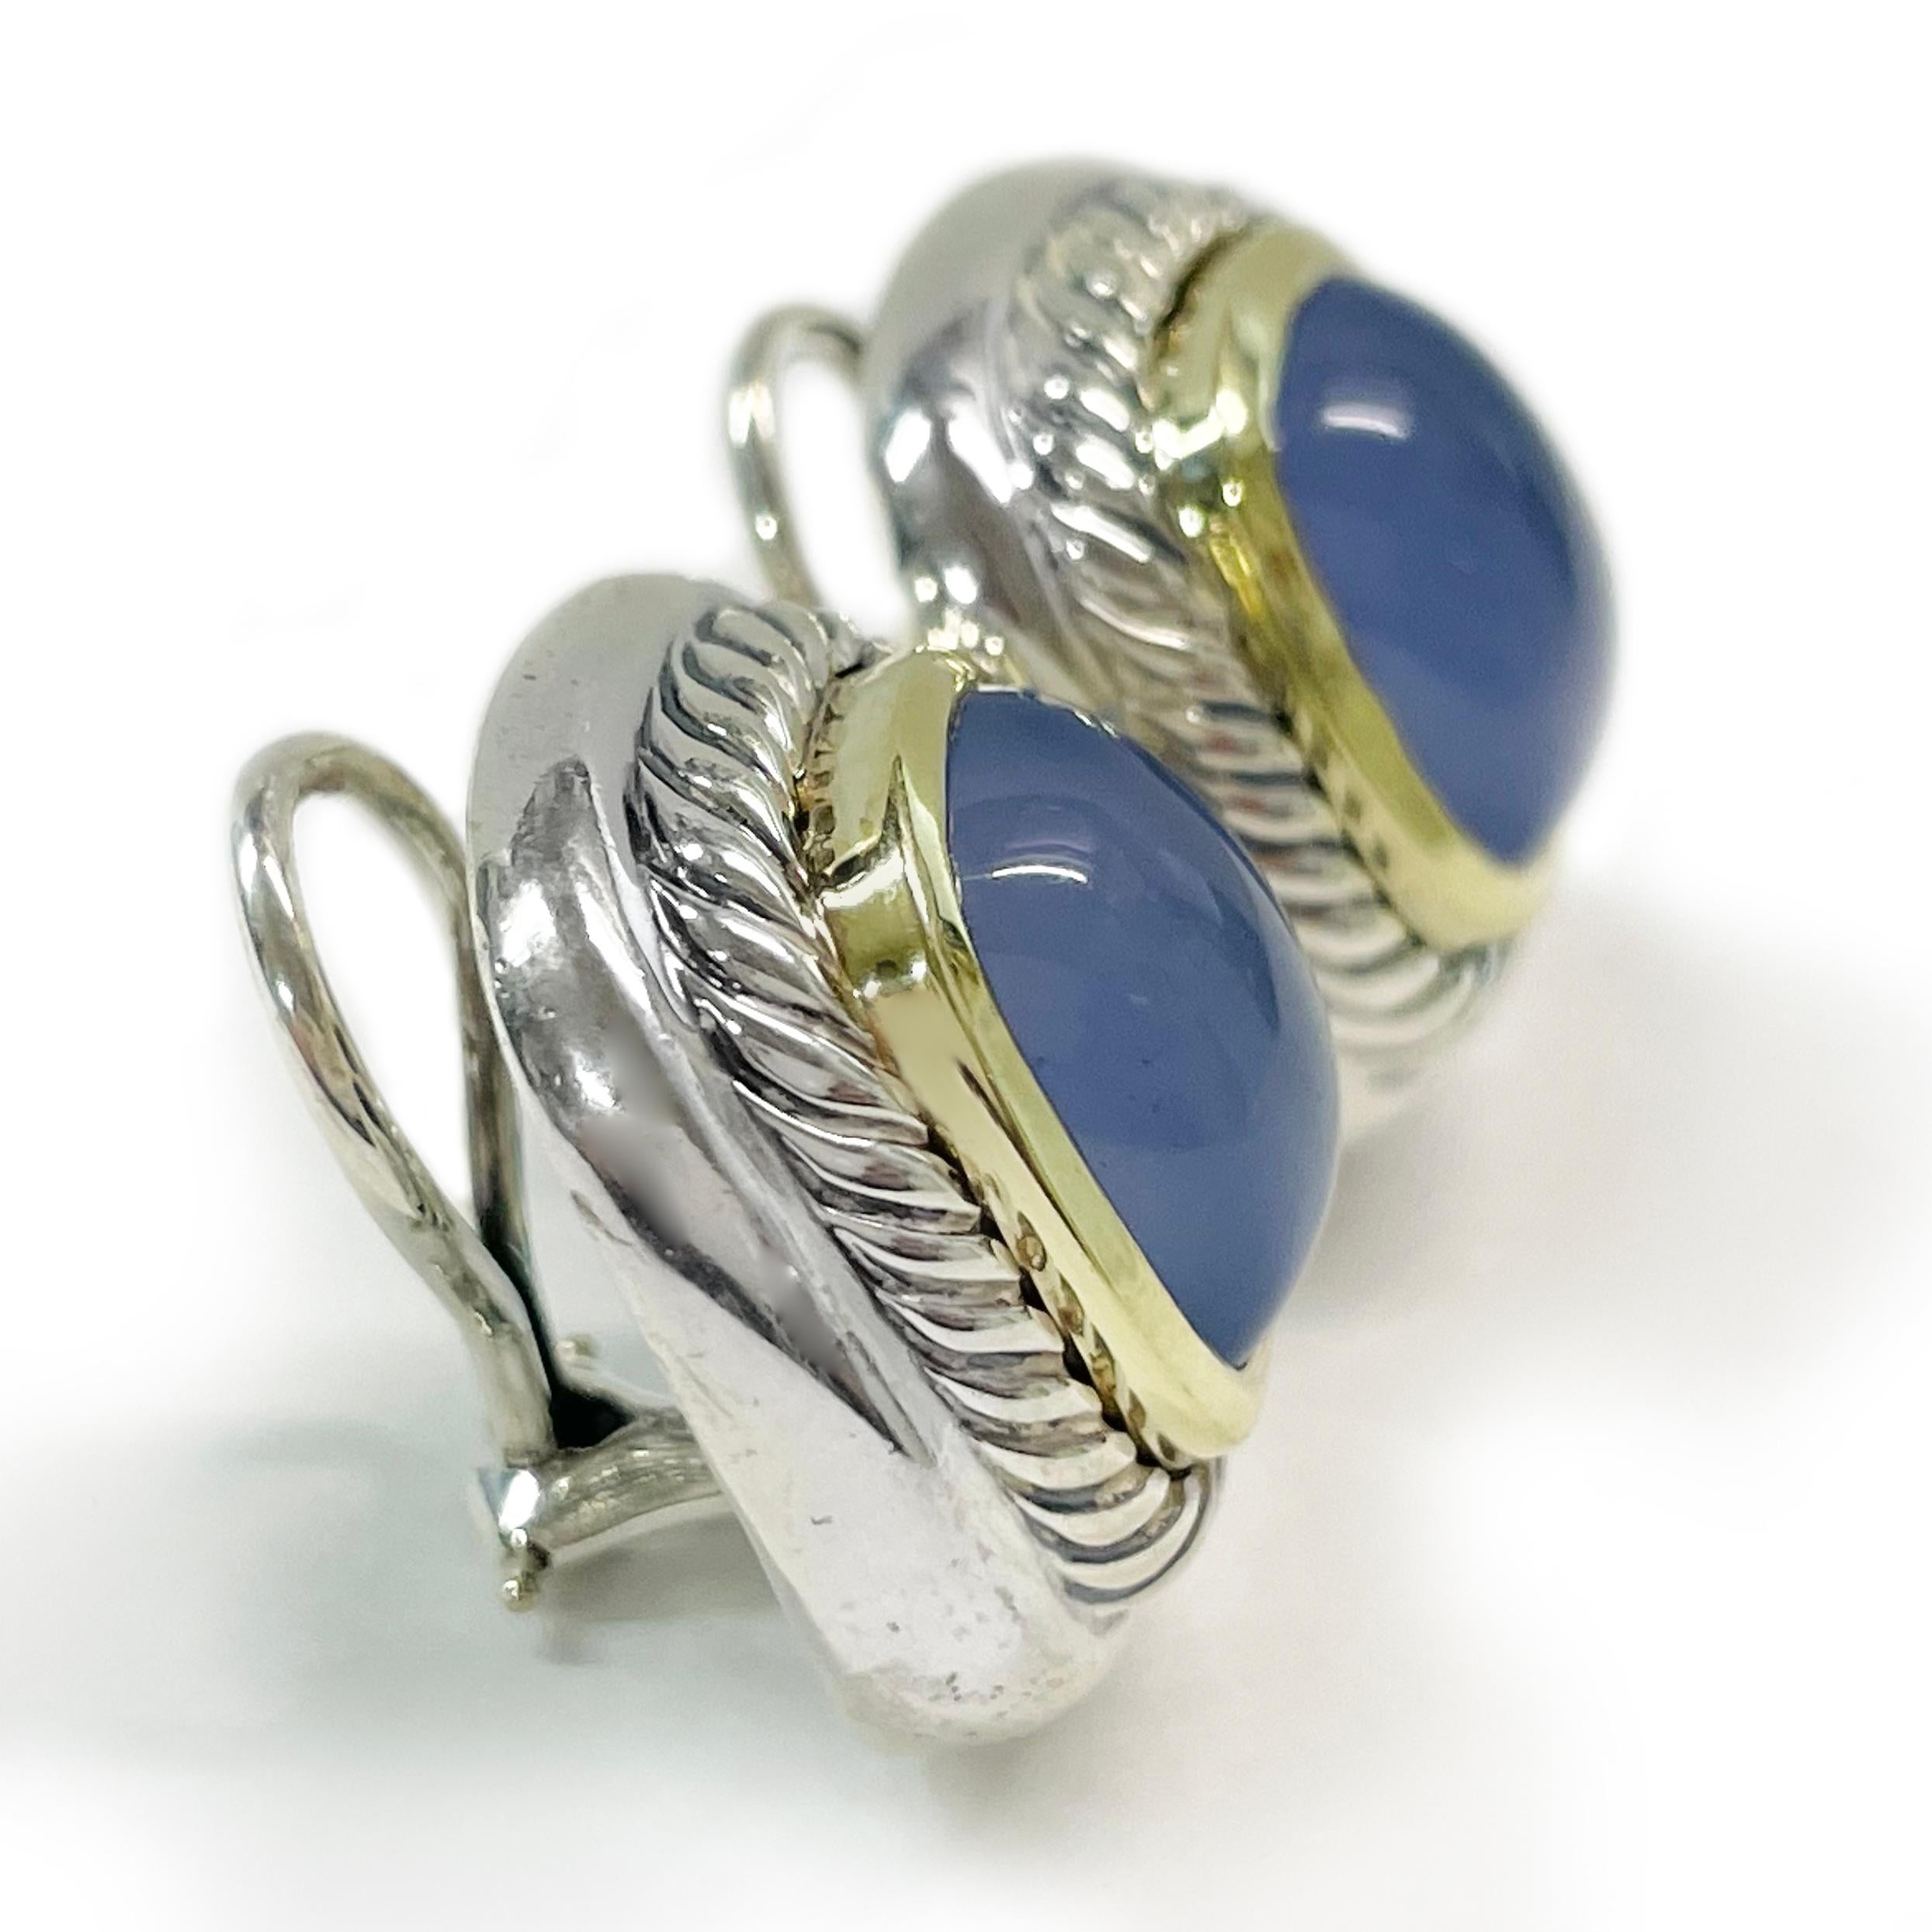 David Yurman Chalcedony Albion Clip-On Earrings. The two-tone earrings each feature a 14mm x 12mm Chalcedony cabochon, 14 karat yellow gold smooth surround and the classic Yurman cable design in sterling silver. This is a classic Yurman design that